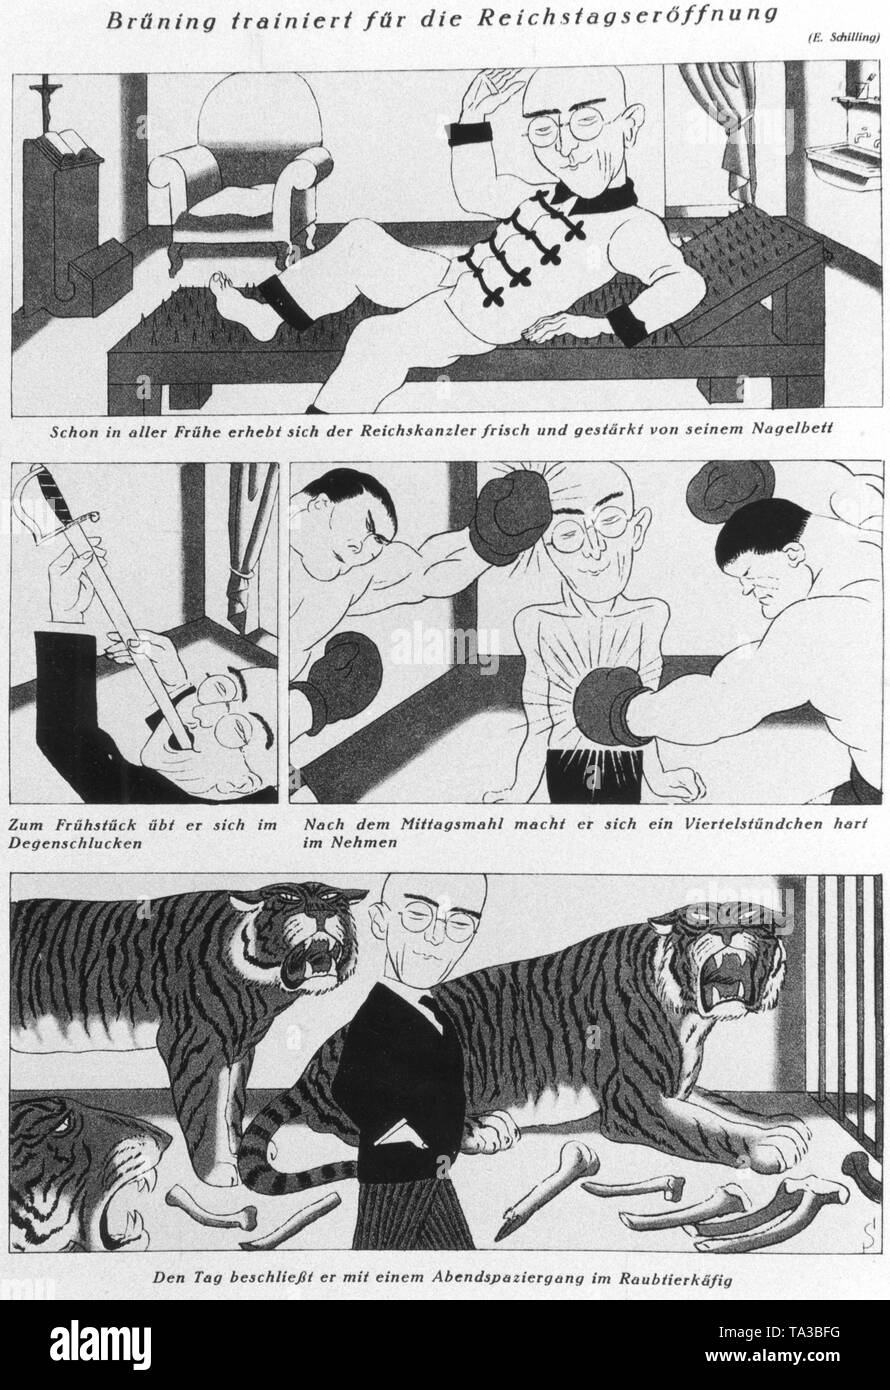 While awaiting the opening of the Reichstag, Heinrich Bruening trains himself by sleeping on a nail bed, swallowing swords, being beaten by boxers and walking in a tiger cage. With this caricature the Simplicissimus alludes to the Chancellor's problems with the Parliament, in which Bruening has no majority. Stock Photo